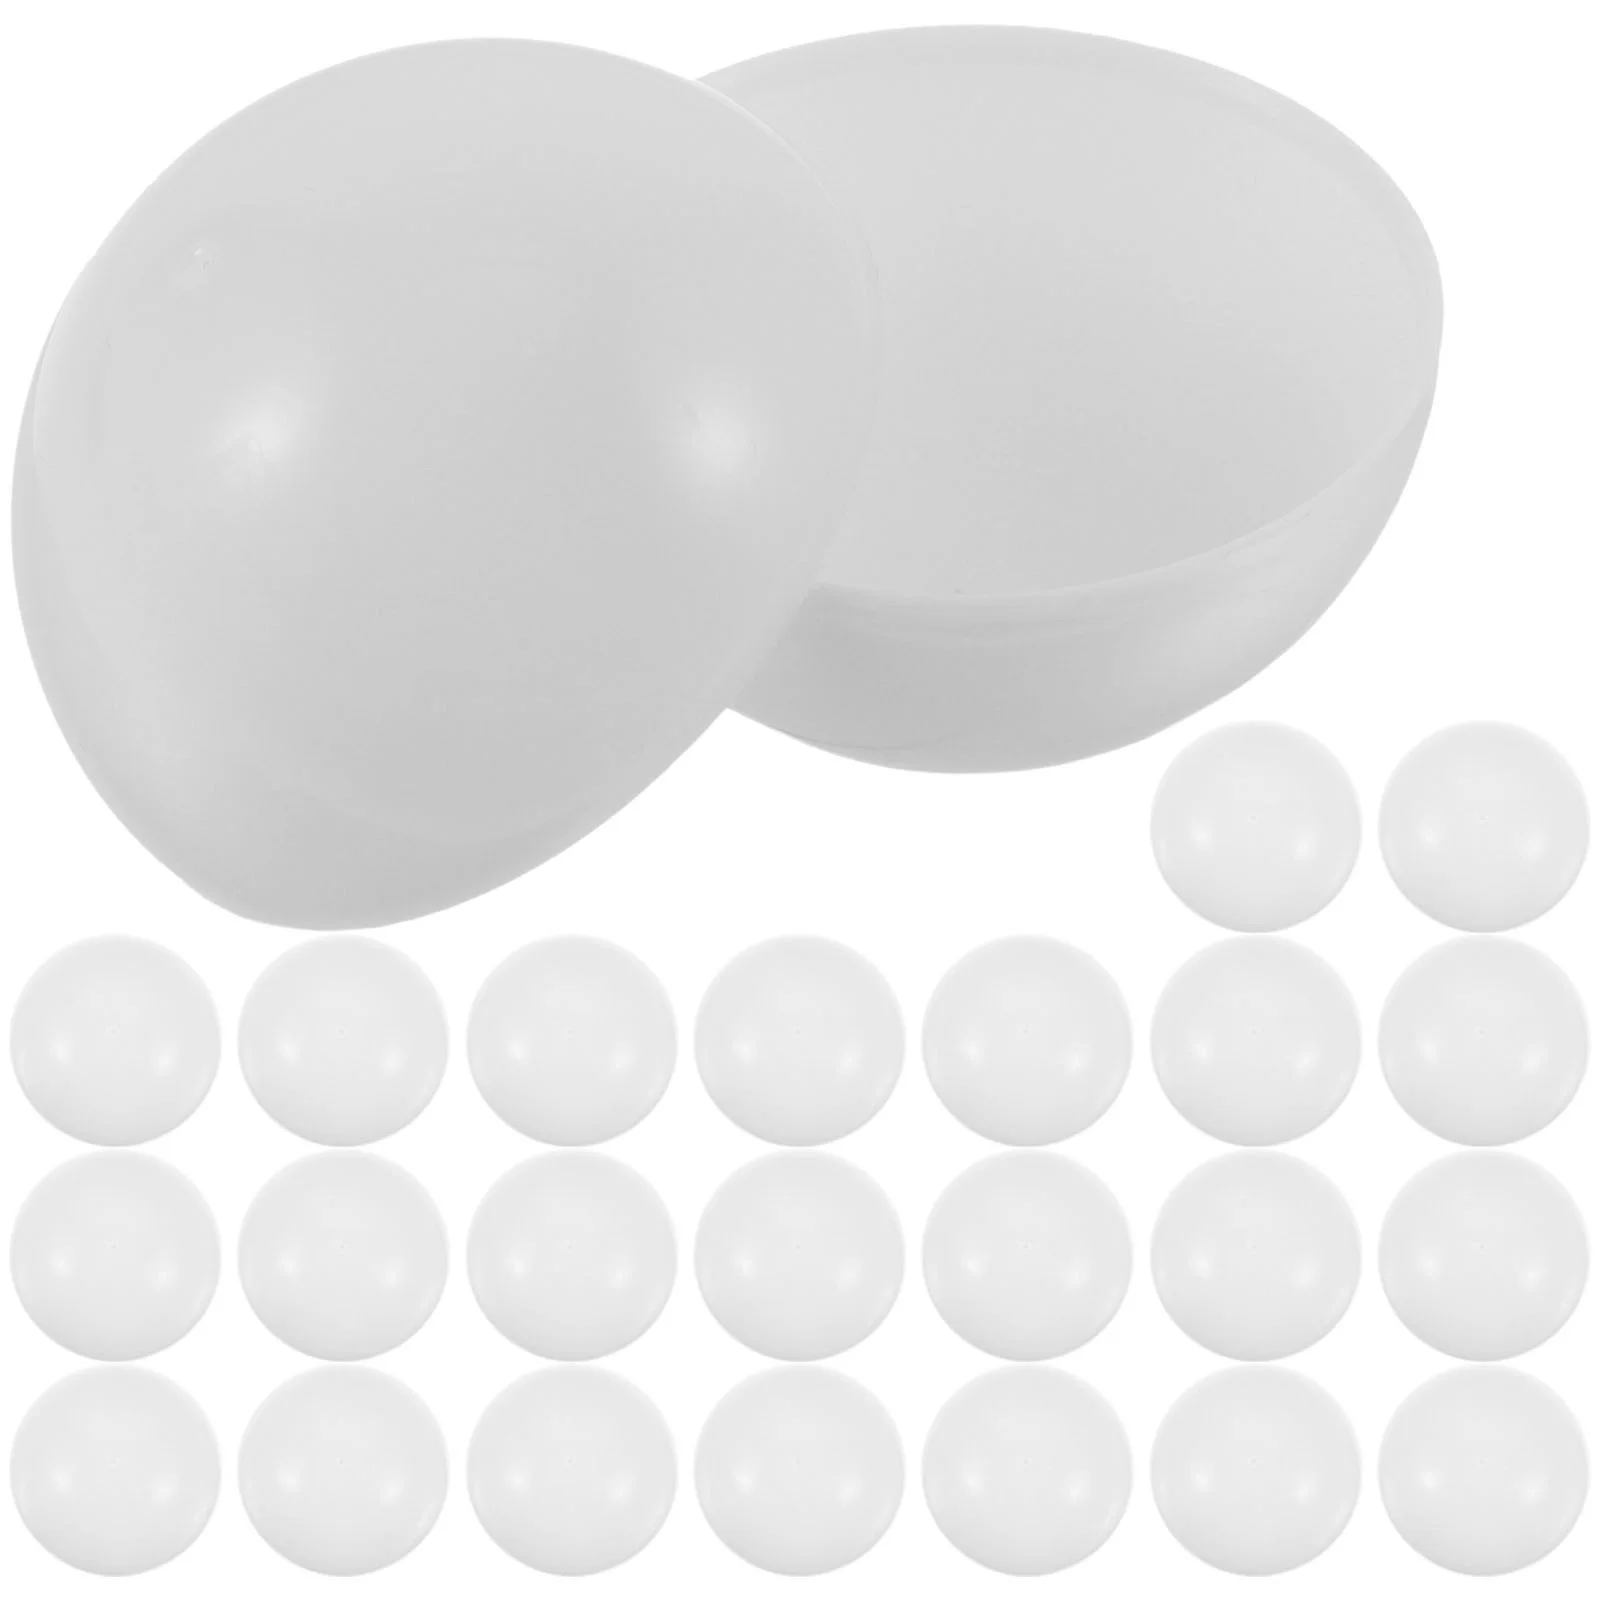 

25 Pcs Lottery Ball Sphere Game Balls Interesting Open Picking Party White Plastic Props